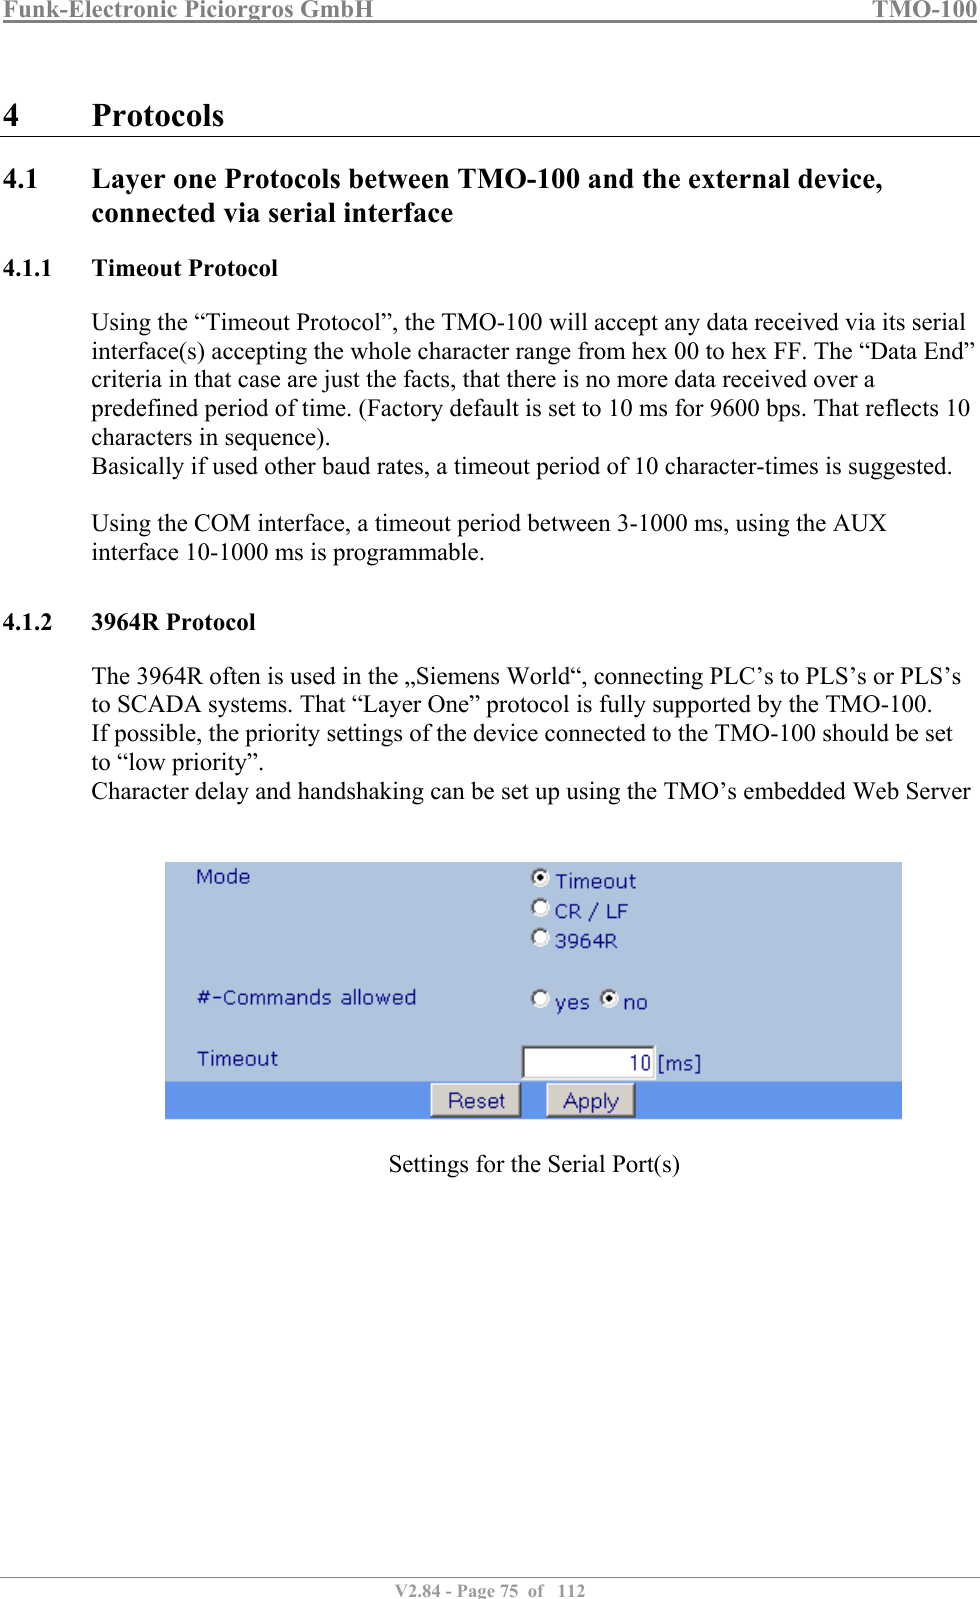 Funk-Electronic Piciorgros GmbH   TMO-100   V2.84 - Page 75  of   112   4 Protocols 4.1 Layer one Protocols between TMO-100 and the external device, connected via serial interface 4.1.1 Timeout Protocol Using the “Timeout Protocol”, the TMO-100 will accept any data received via its serial interface(s) accepting the whole character range from hex 00 to hex FF. The “Data End” criteria in that case are just the facts, that there is no more data received over a predefined period of time. (Factory default is set to 10 ms for 9600 bps. That reflects 10 characters in sequence).  Basically if used other baud rates, a timeout period of 10 character-times is suggested.  Using the COM interface, a timeout period between 3-1000 ms, using the AUX interface 10-1000 ms is programmable.   4.1.2 3964R Protocol The 3964R often is used in the „Siemens World“, connecting PLC’s to PLS’s or PLS’s to SCADA systems. That “Layer One” protocol is fully supported by the TMO-100.  If possible, the priority settings of the device connected to the TMO-100 should be set to “low priority”. Character delay and handshaking can be set up using the TMO’s embedded Web Server     Settings for the Serial Port(s)  